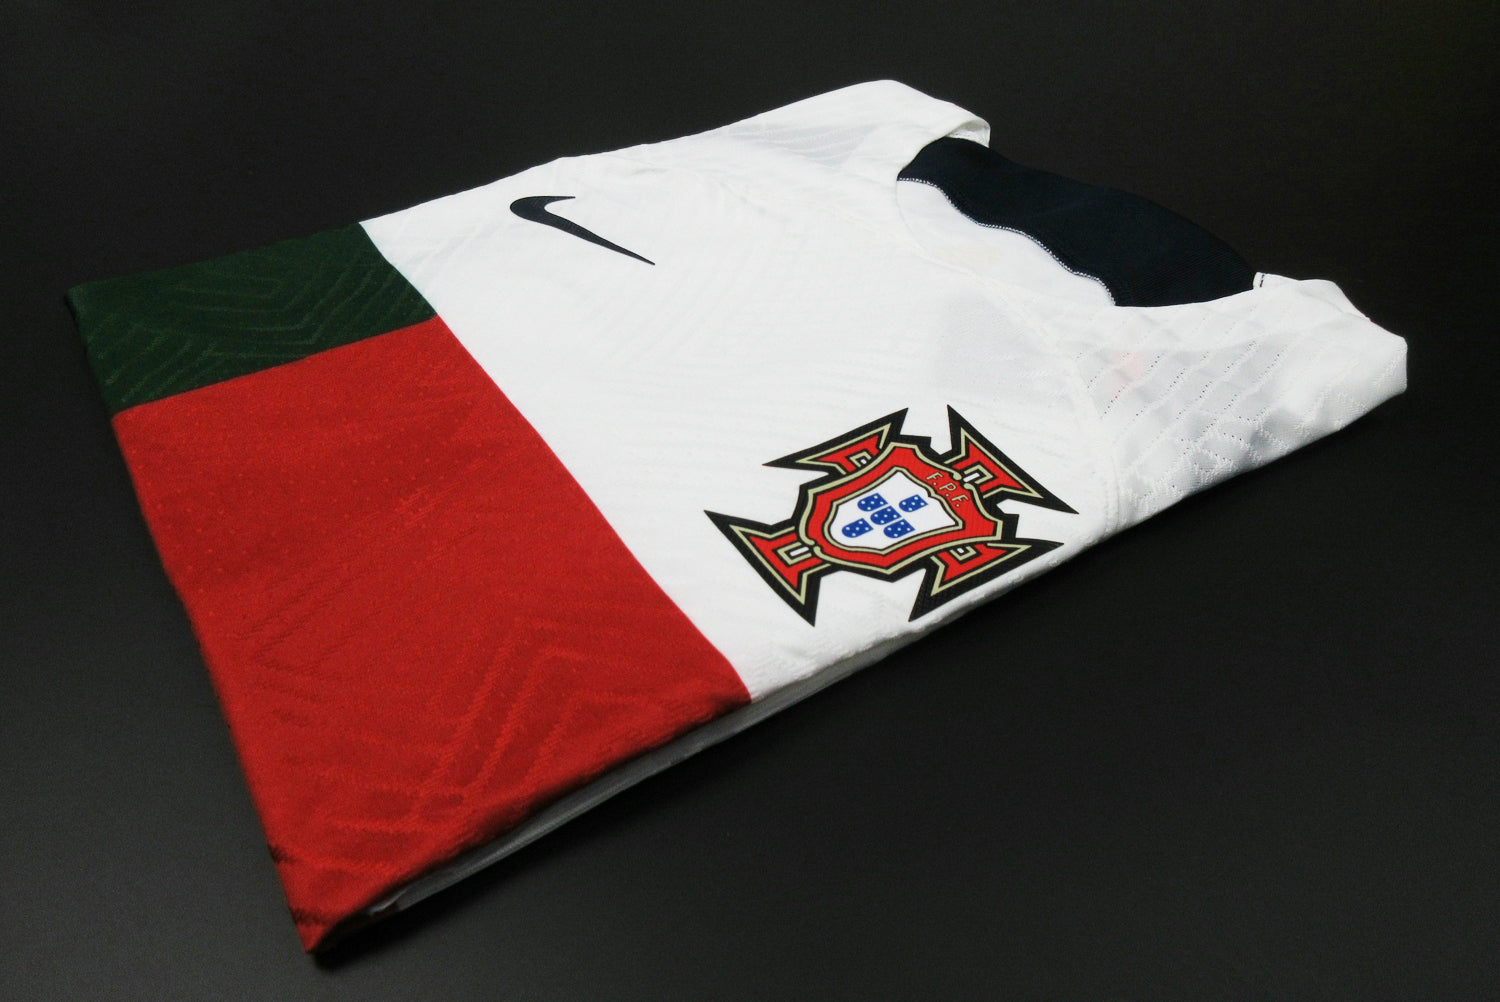 Portugal PLAYER VERSION Away World Cup 2022 Jersey